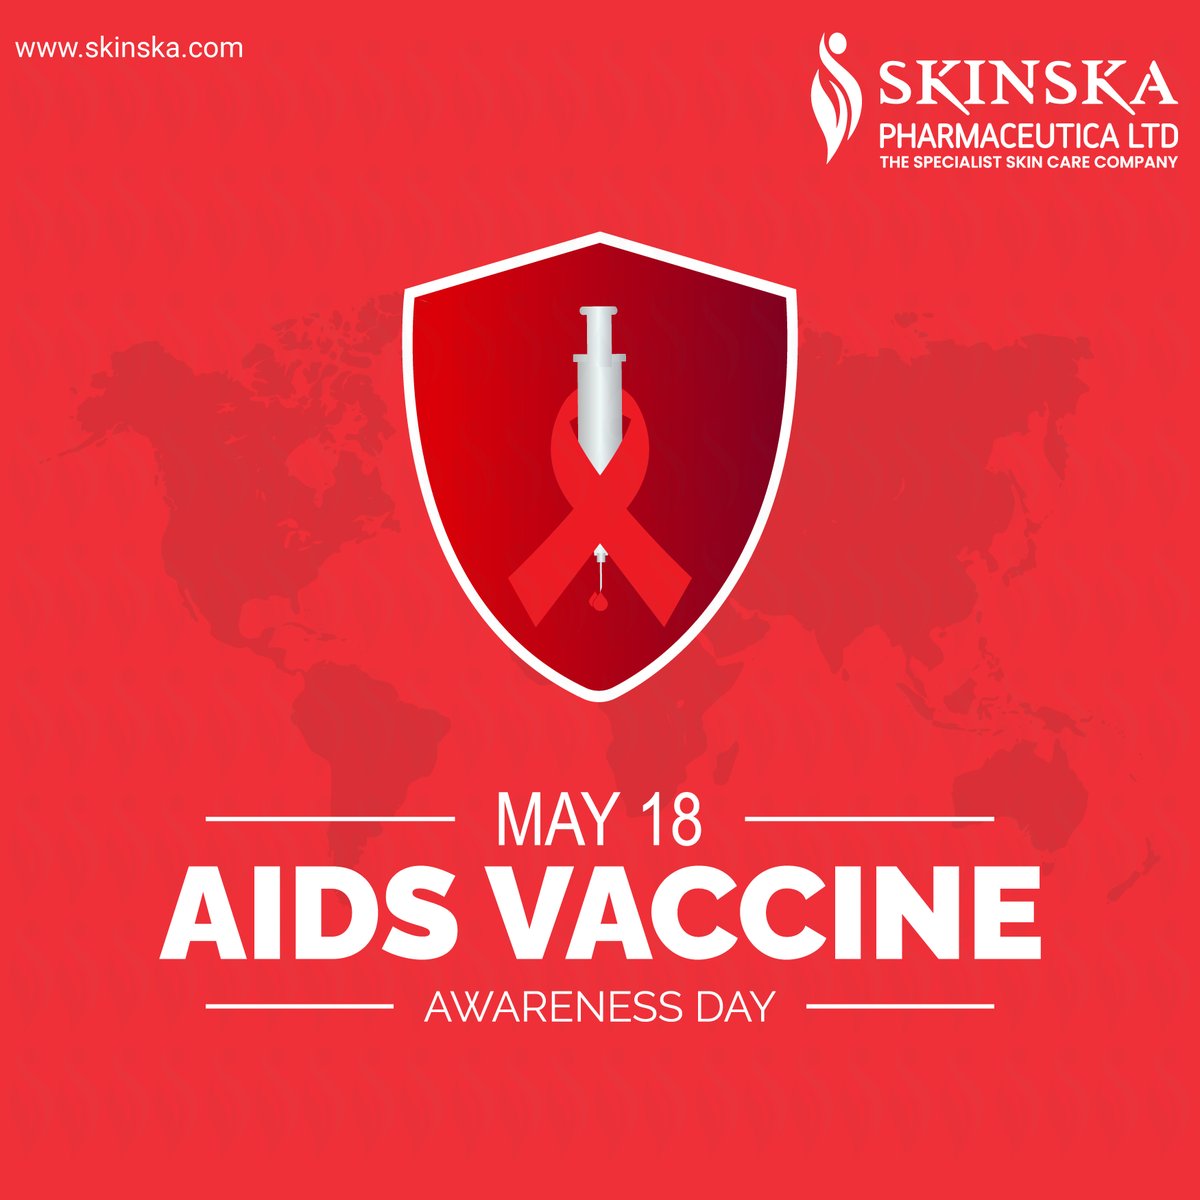 AIDS Vaccine Awareness Day 📷📷 This day is observed to raise awareness about HIV, the benefits of immunization, and other vaccination details! #aids #hiv #aidsawareness #aidsvaccine #aidsvaccineawarenessday #hivawareness #aidsvaccineday #aidshealthcare #hivhealthcare #awareness